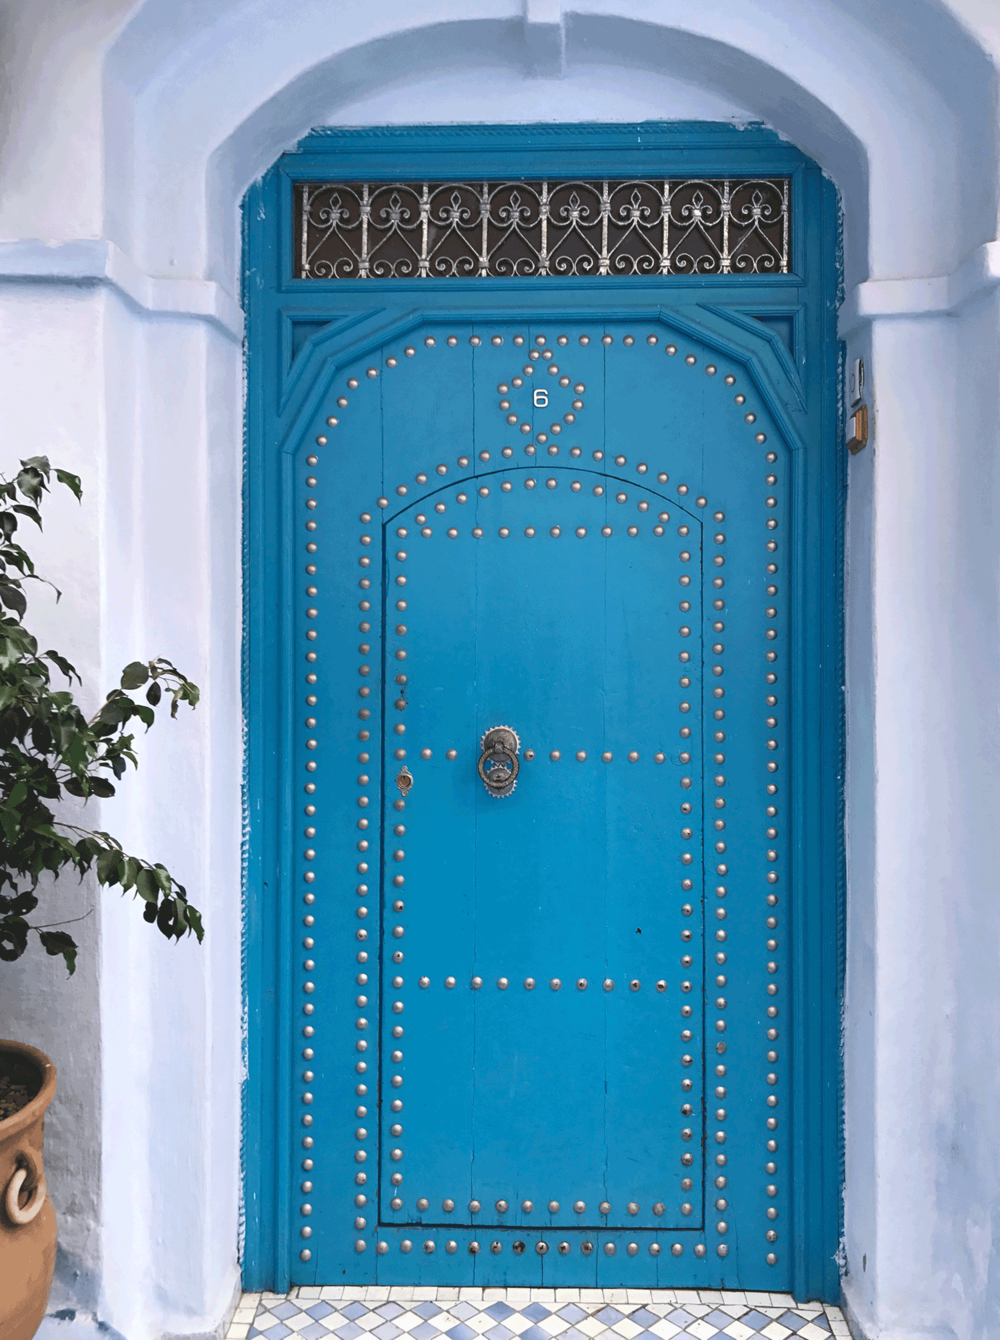 Chefchaouen-Morocco-image-blue-door-home.png